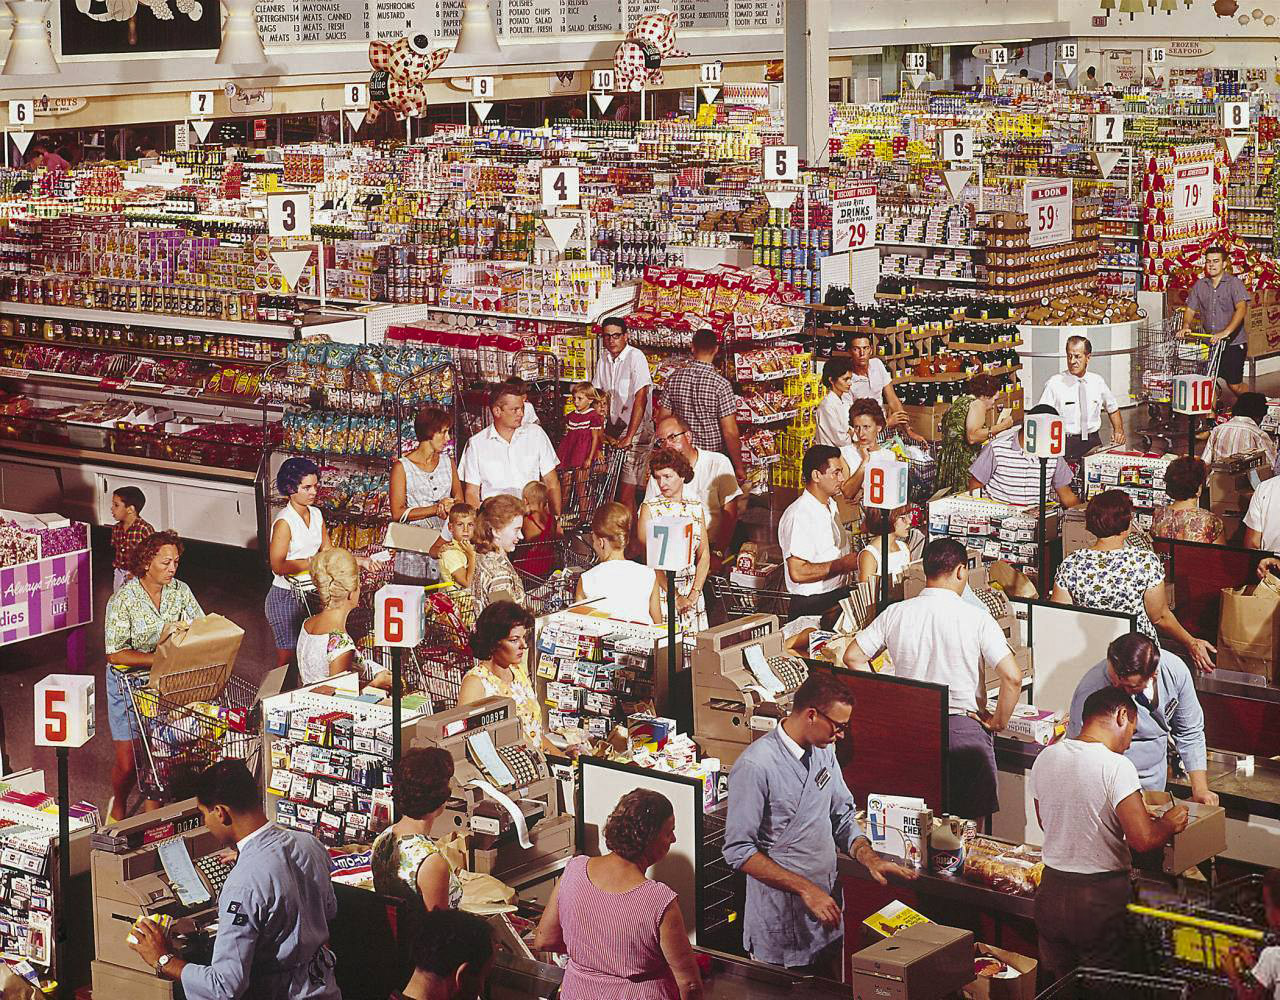 1964. The Super Giant supermarket in Rockville, Maryland. Color transparency by John Dominis, Life magazine photo archive. View full size.